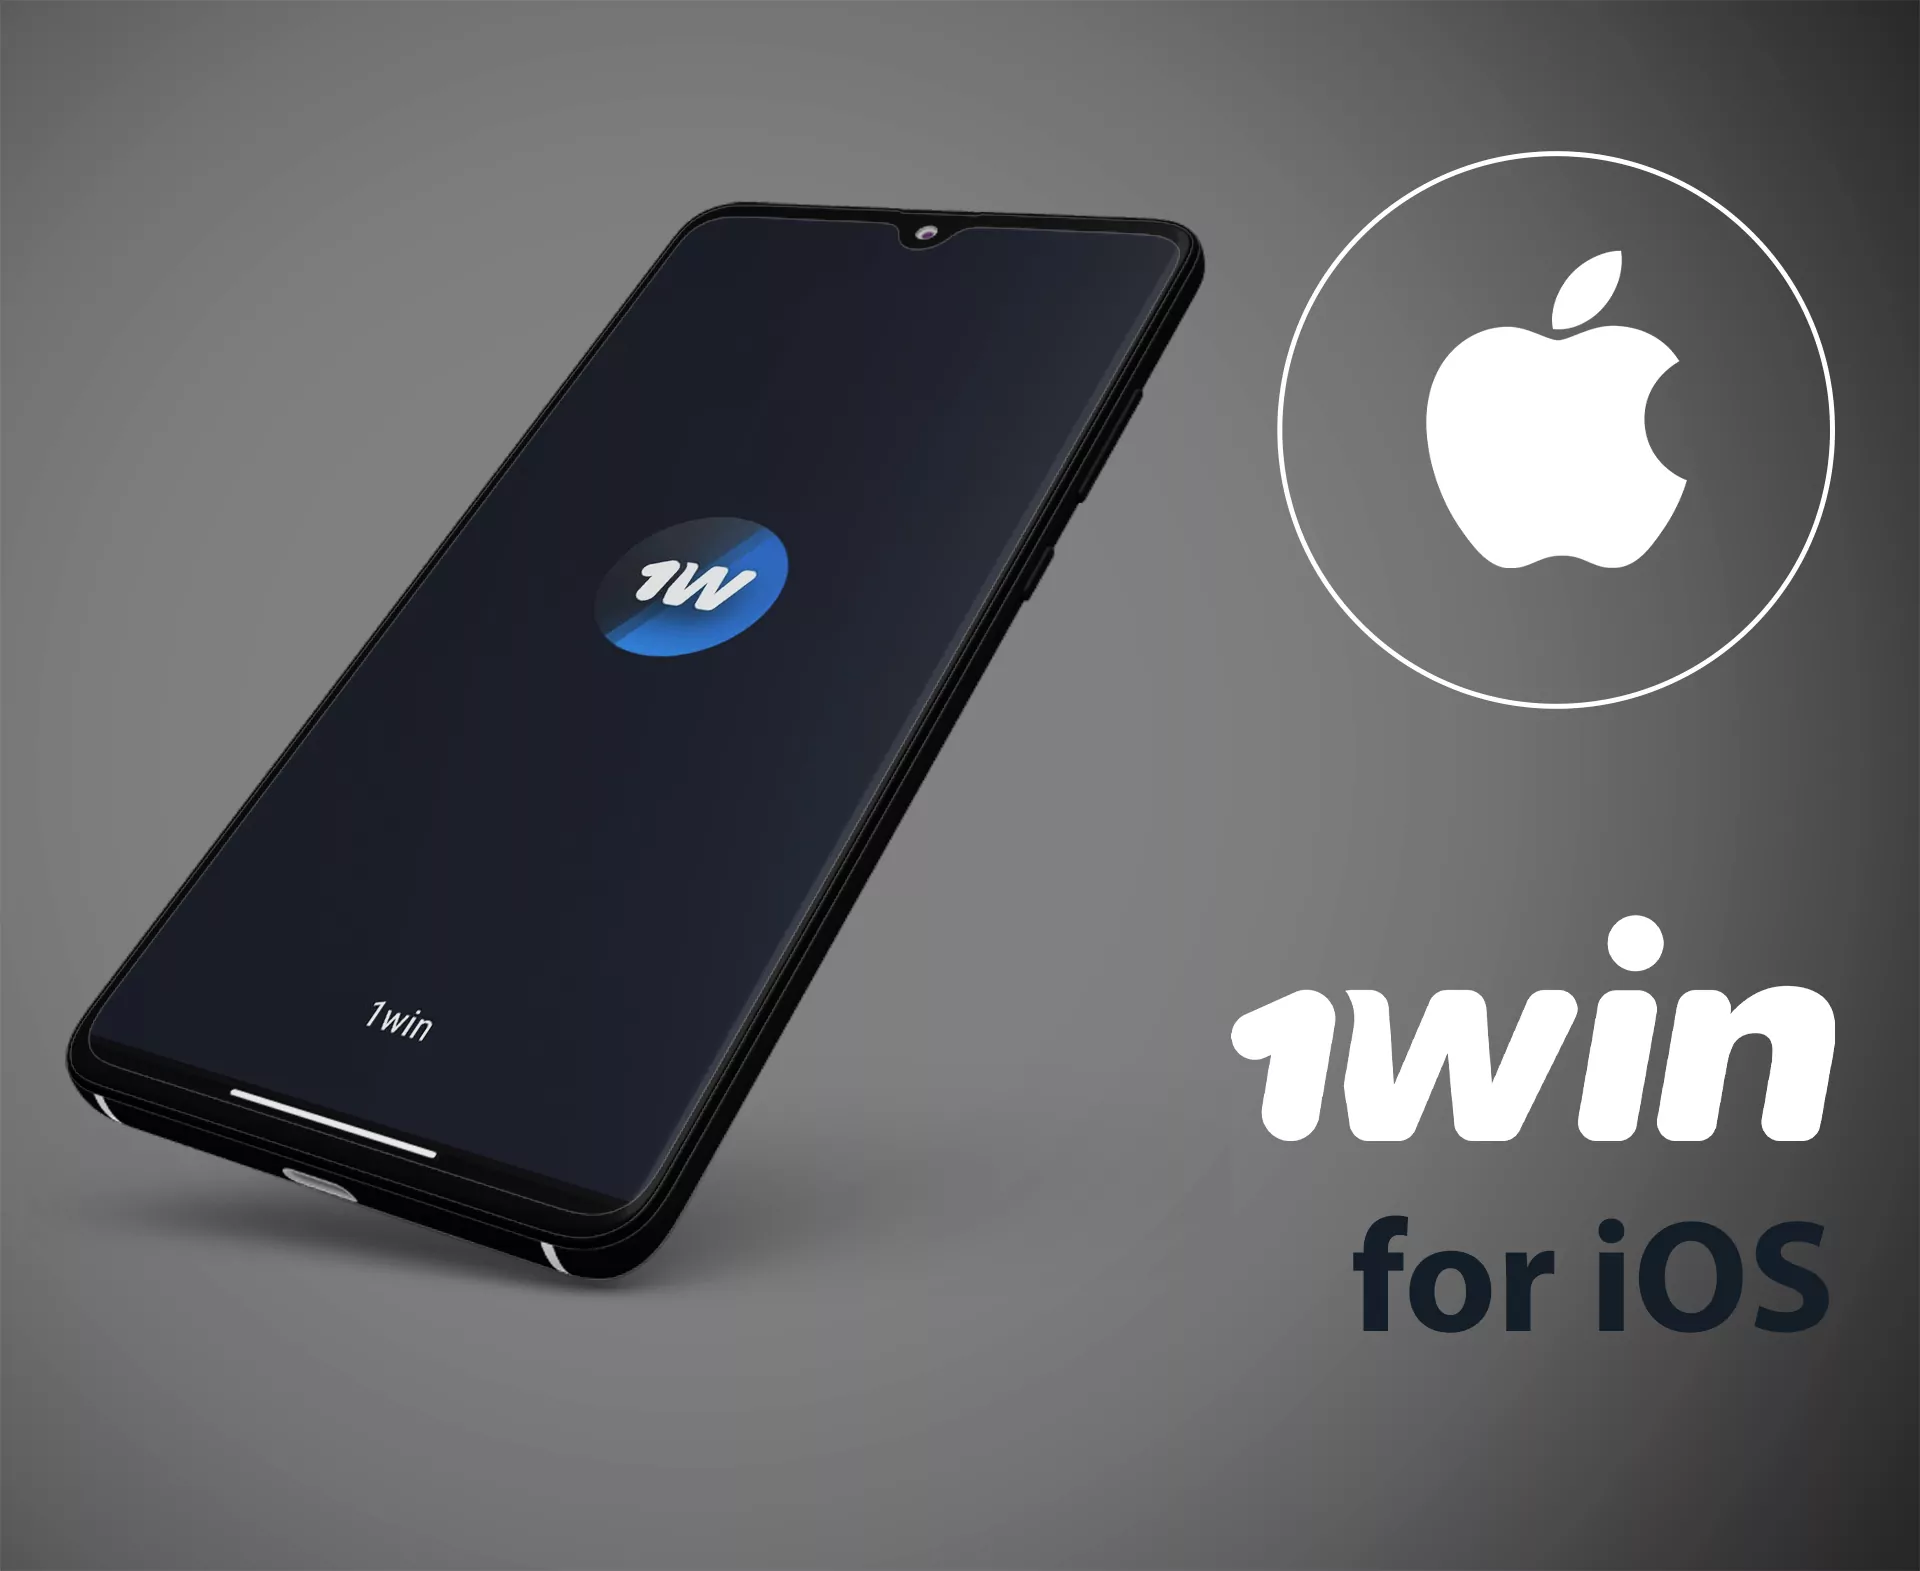 Unpack an installation file and install the 1win app for iOS devices.